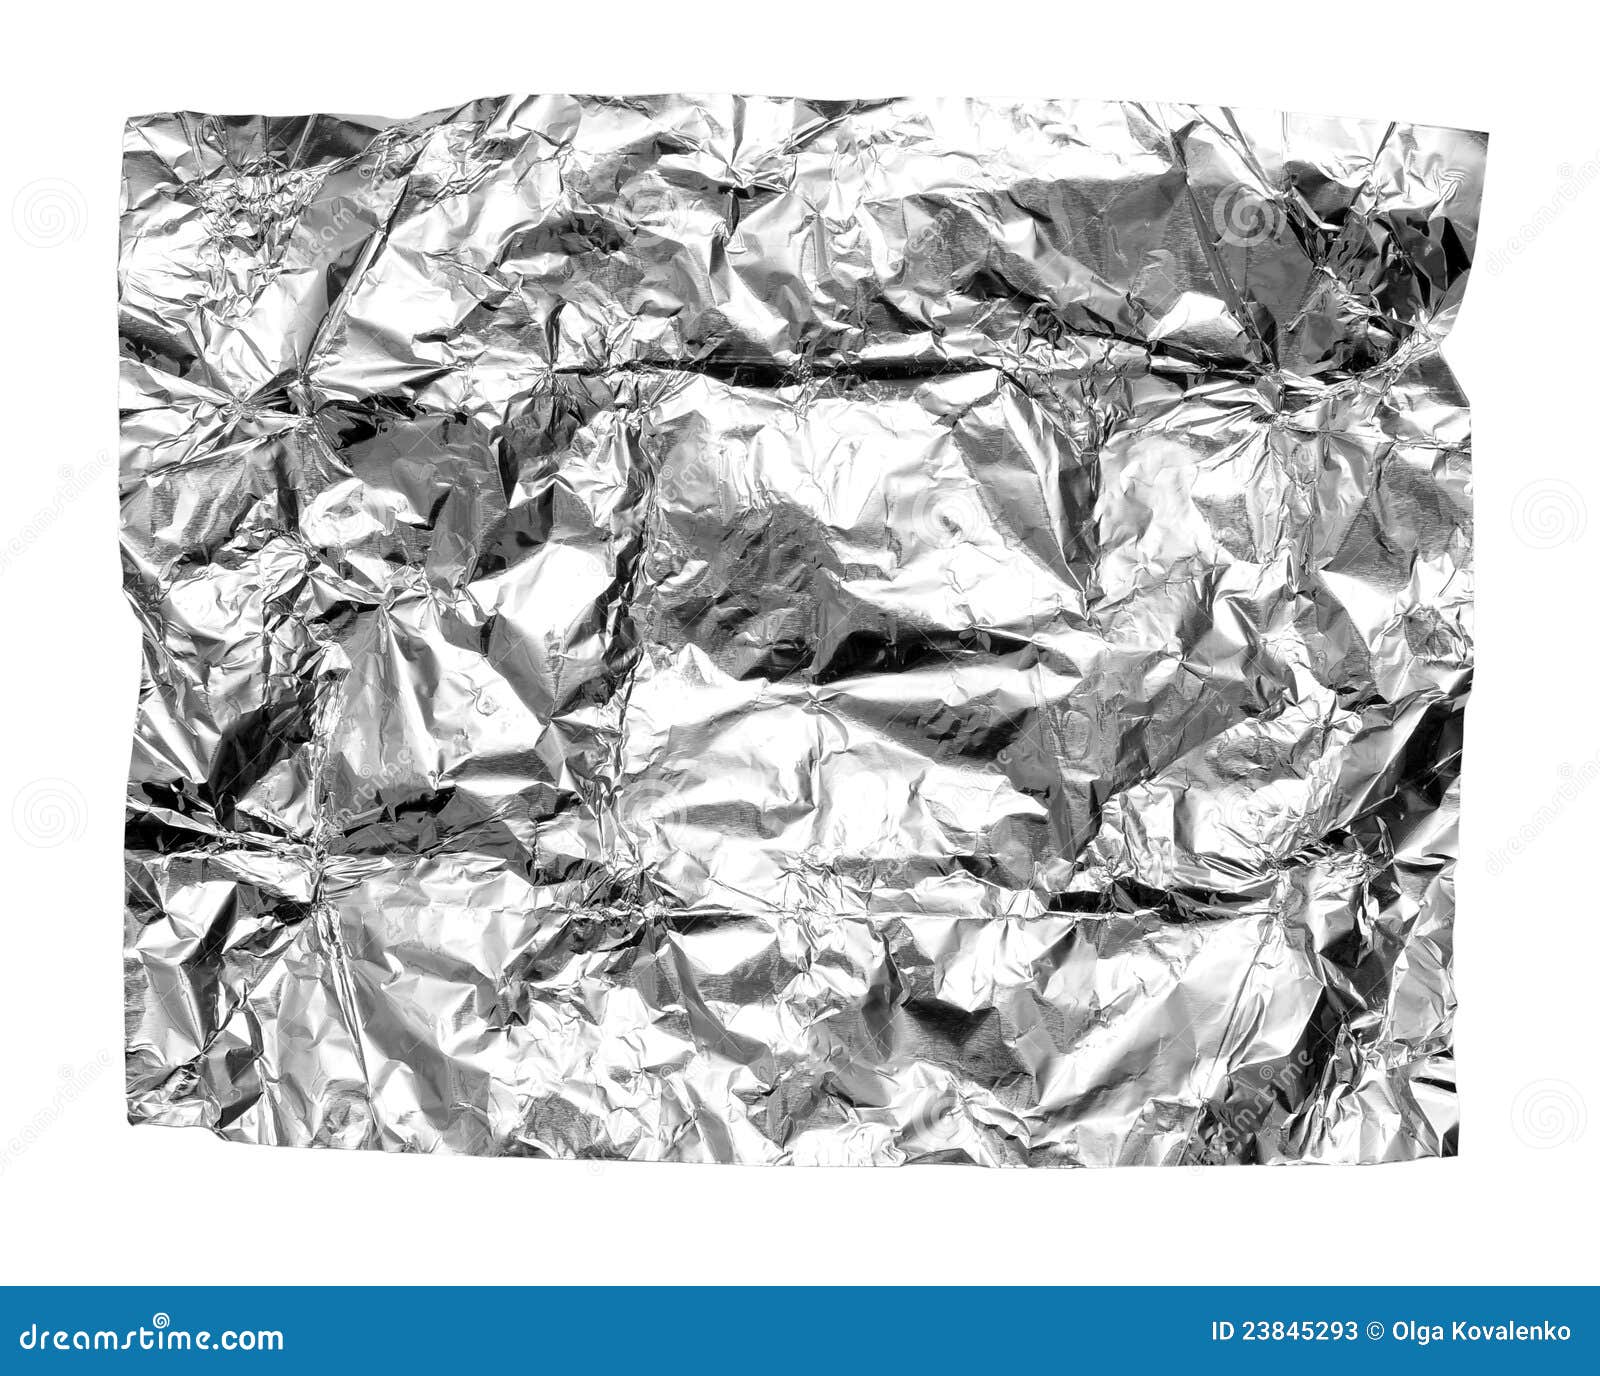 abstract crumpled silver aluminum foil